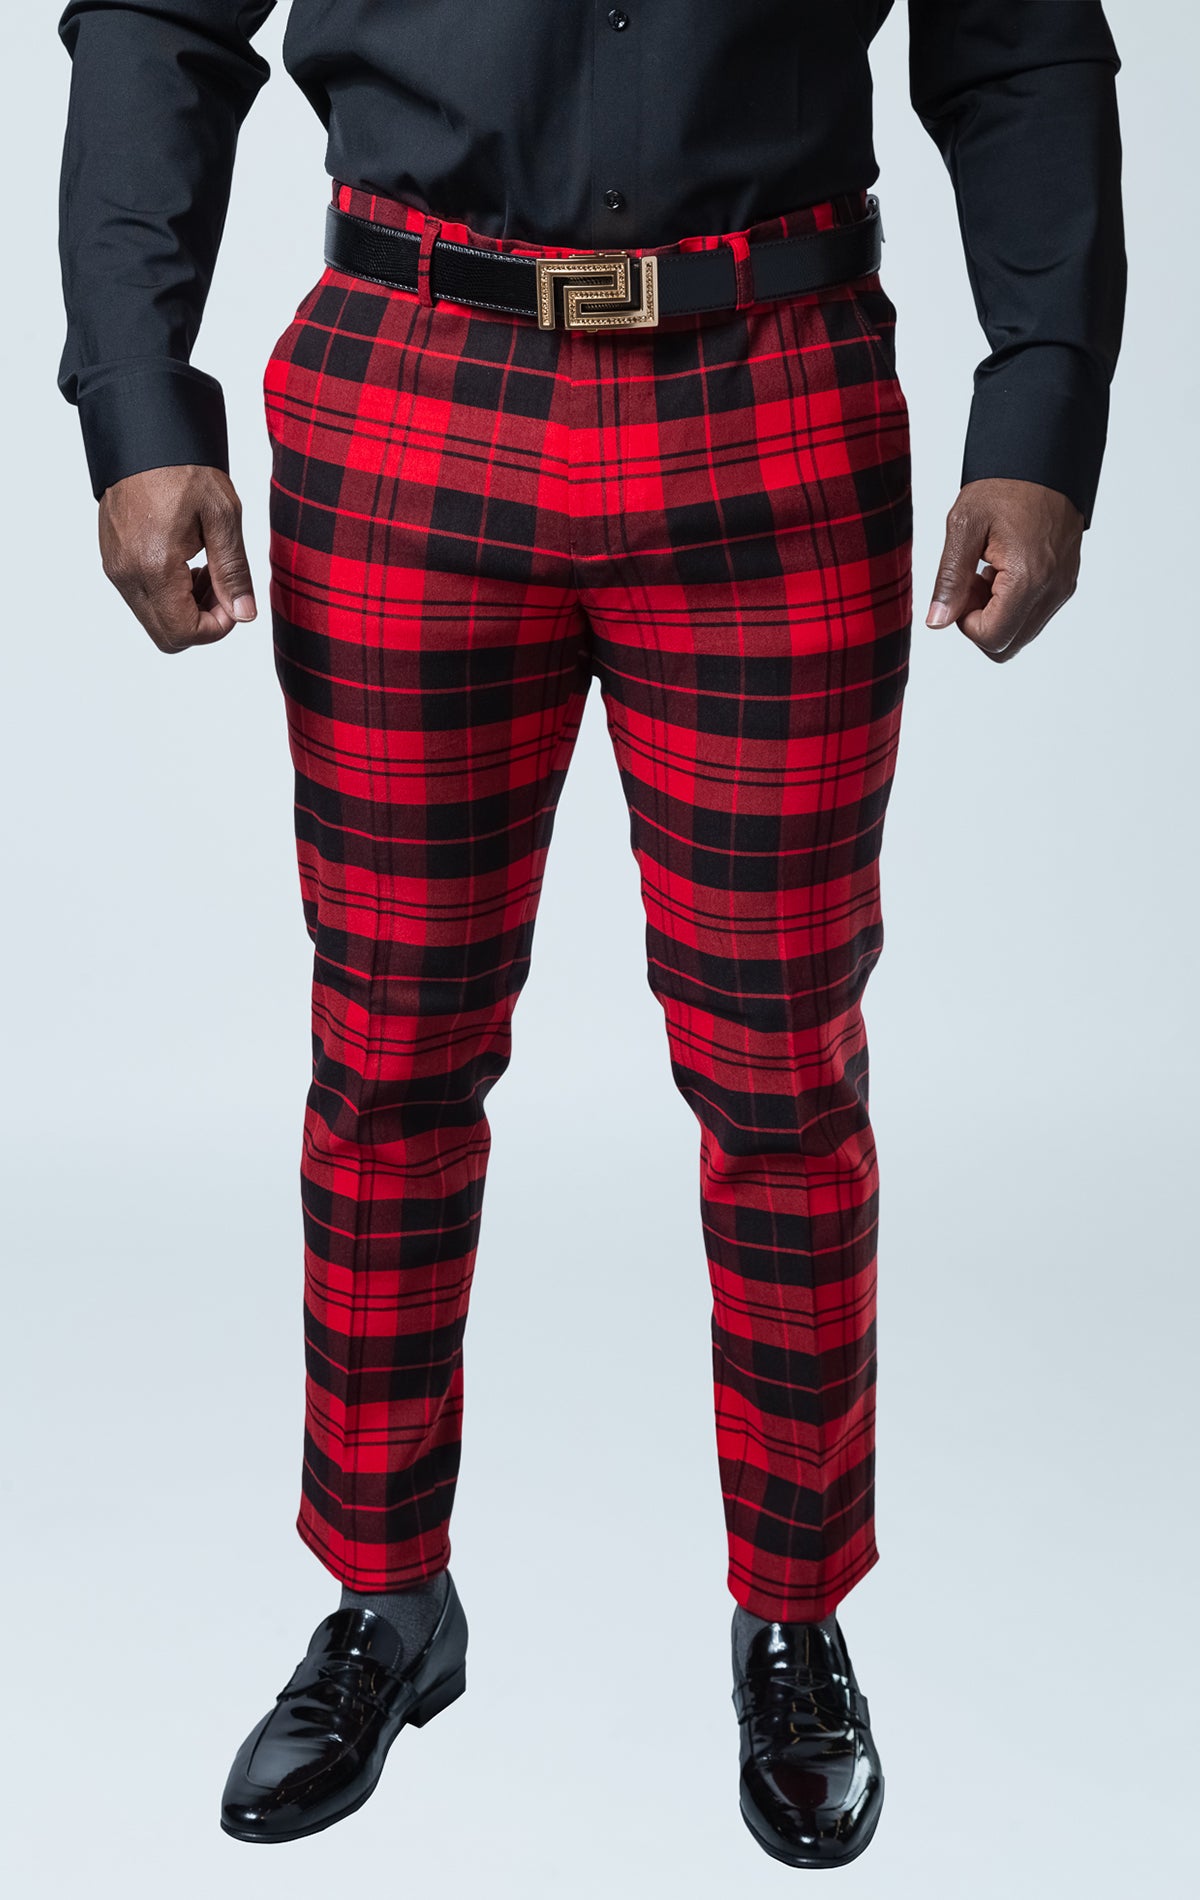 Checkered black and red dress pants